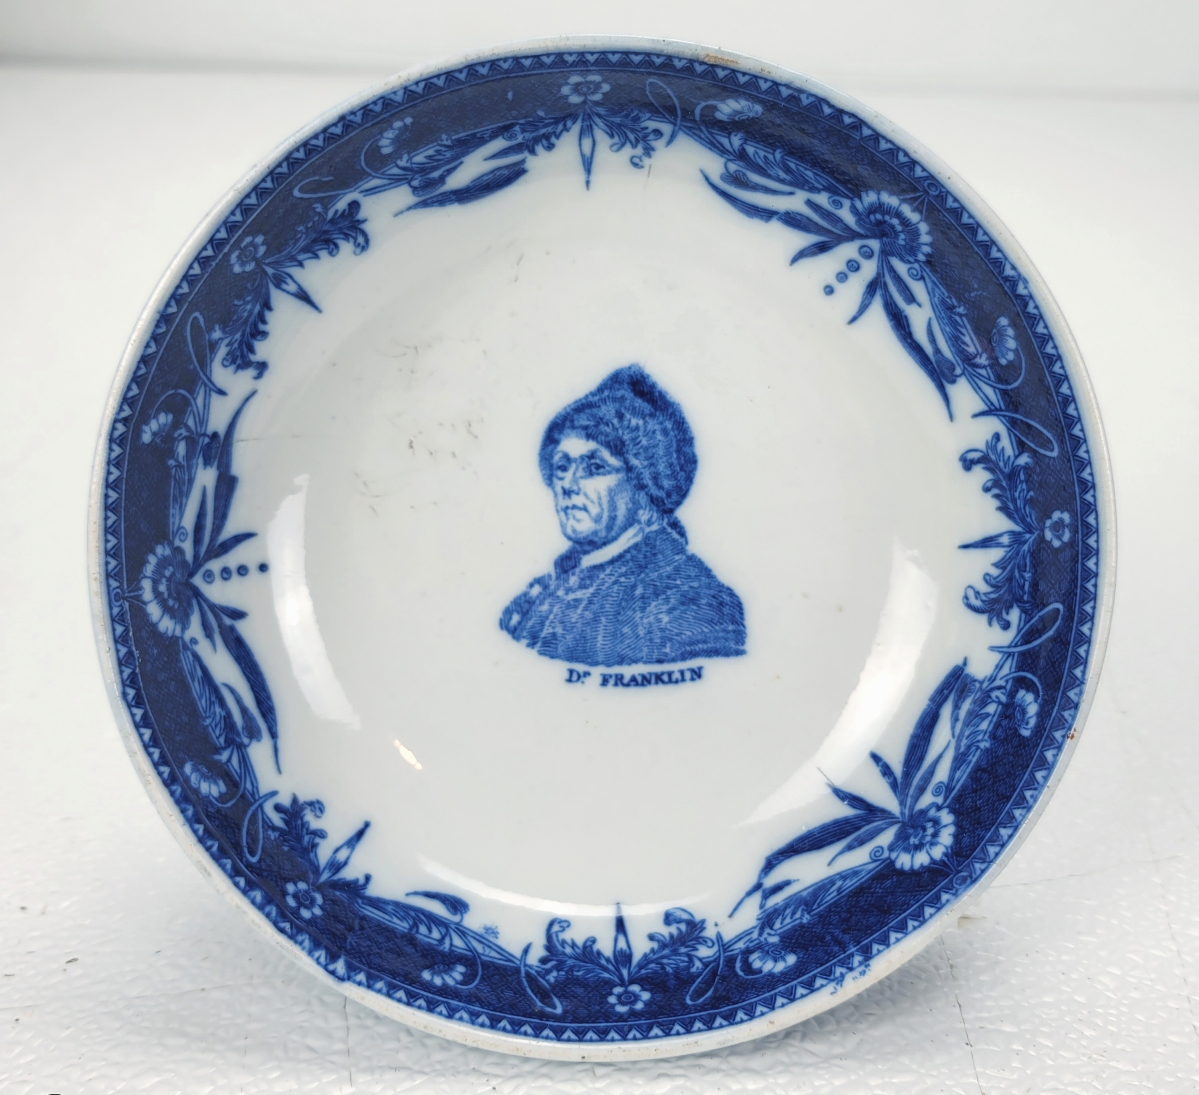 A private client from Pennsylvania purchased this historical Staffordshire bowl with the image of Doctor Franklin in the middle. ($8/10,000-plus).